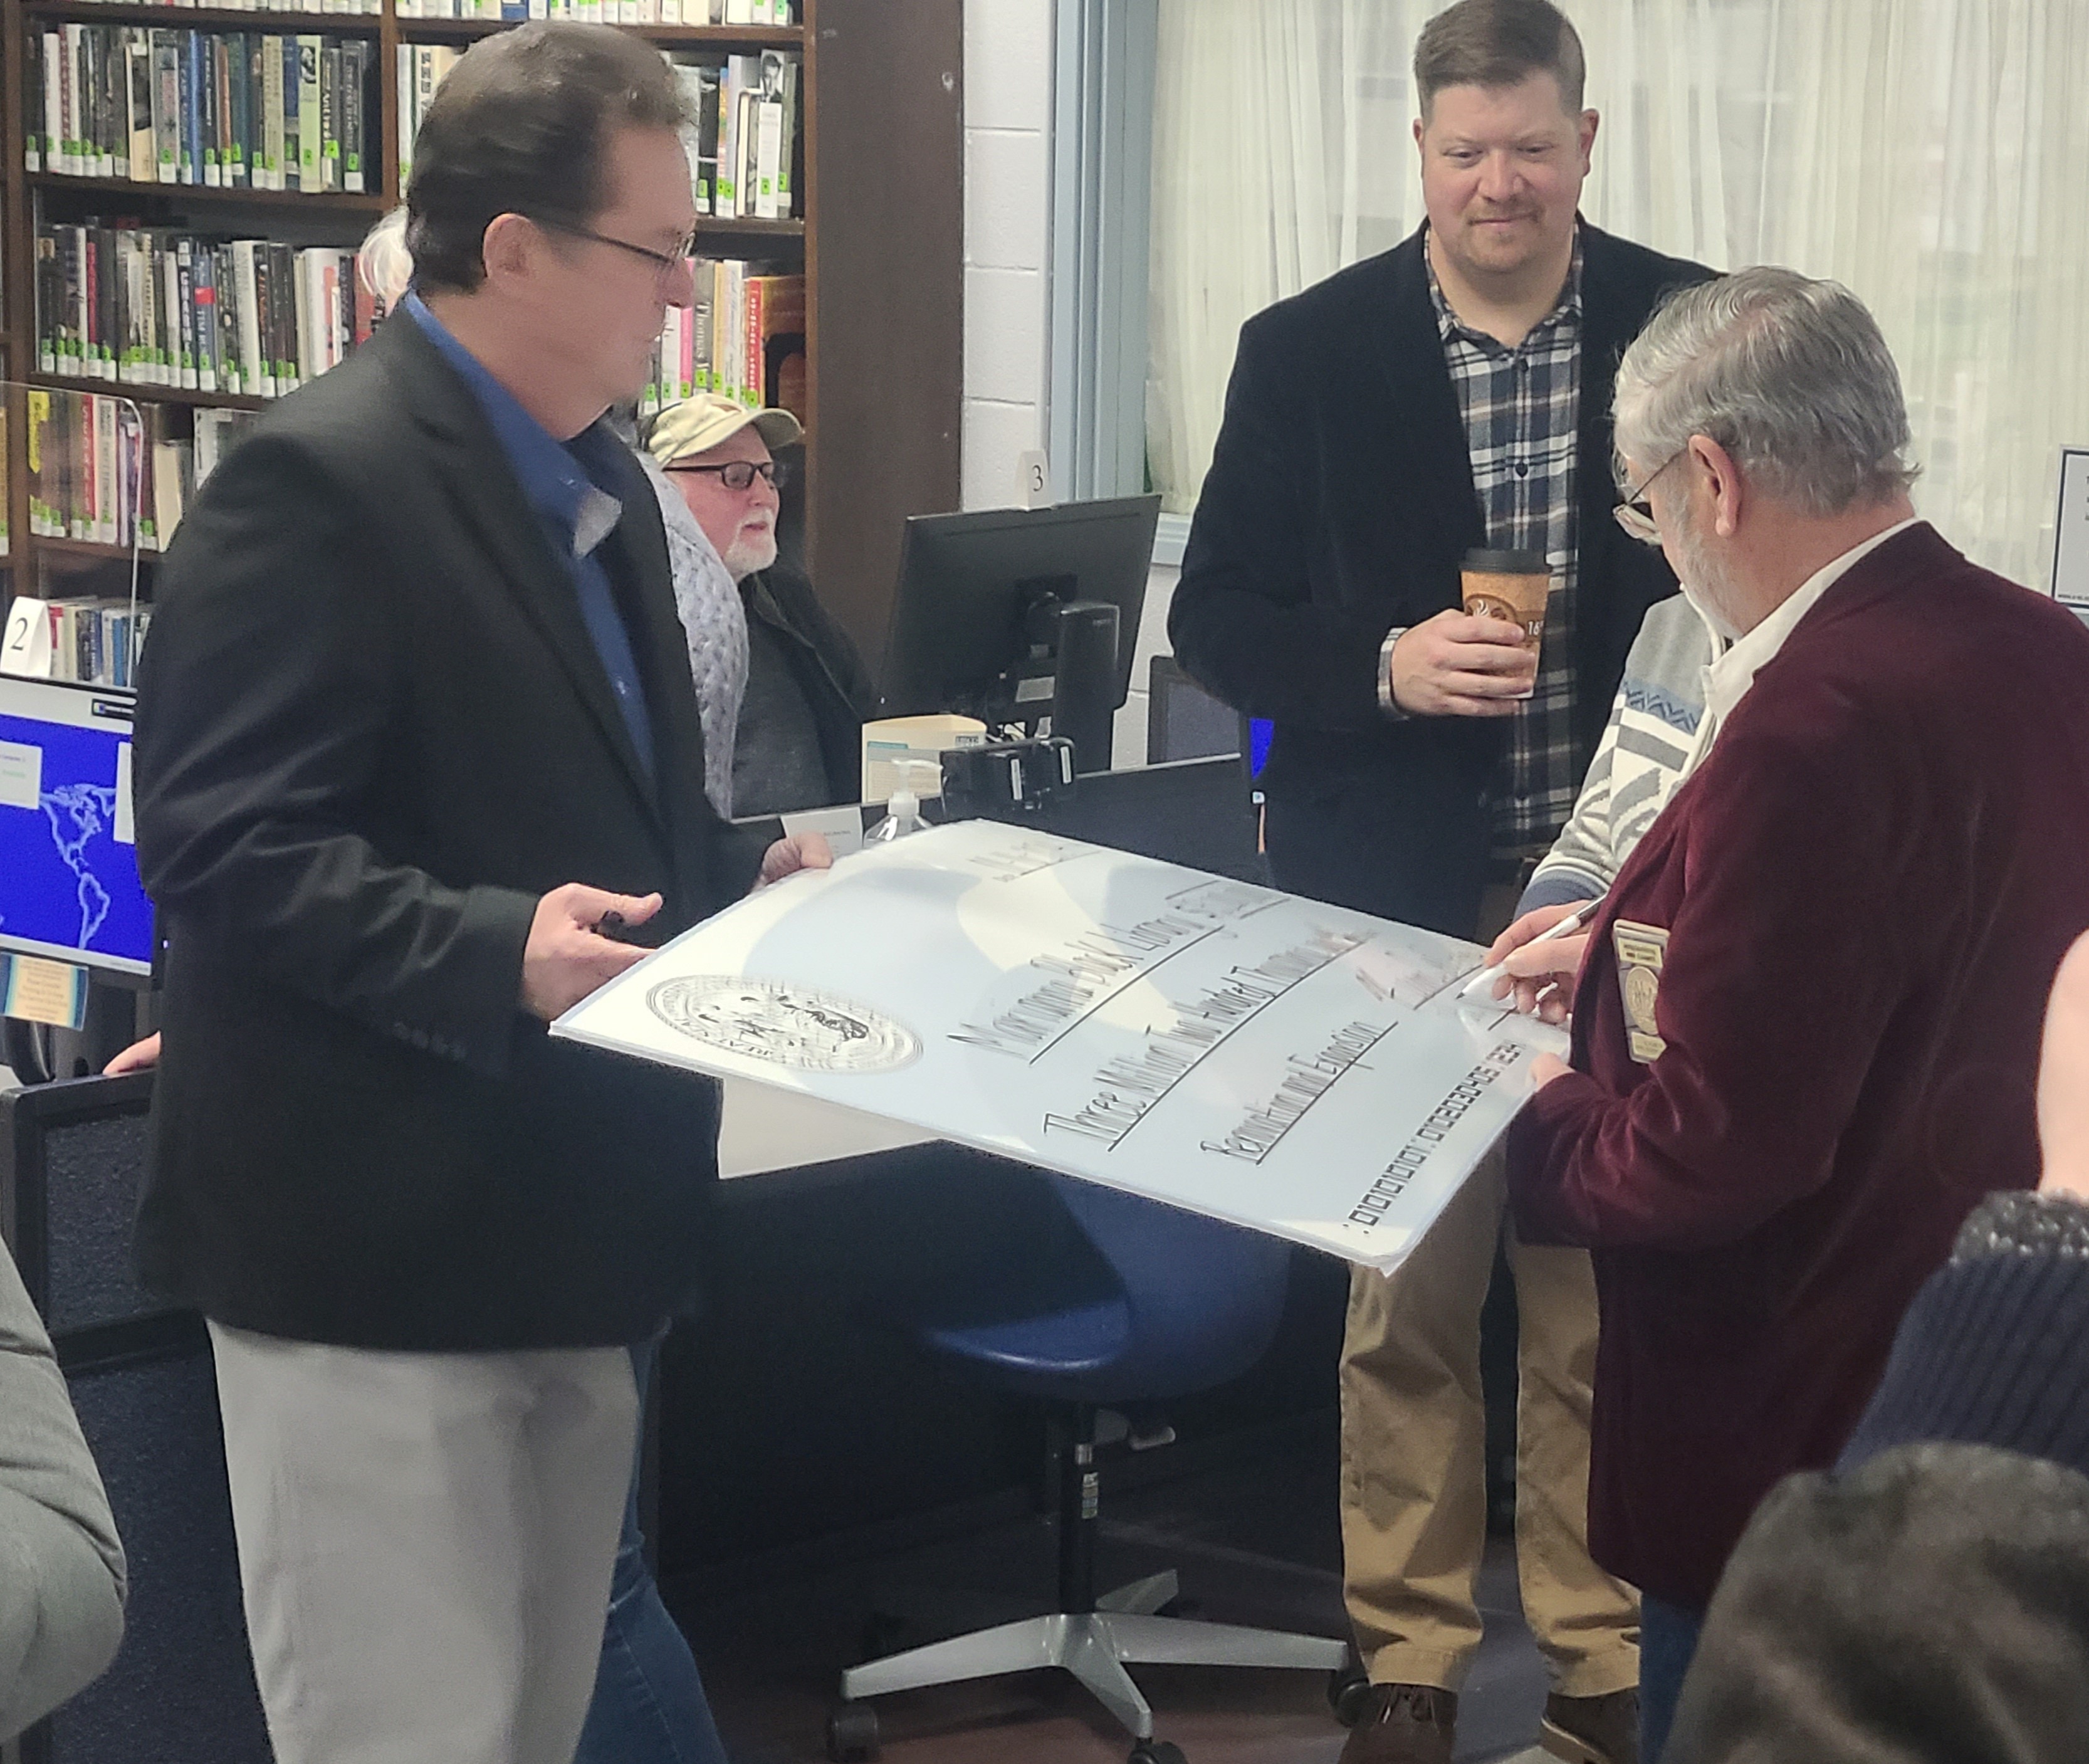 Above, Marianna Black Library Board Member Christian Siewers looks on as N.C. Senator Kevin Corbin (left) and NC Representative Mike Clampitt sign the $3.2 million dollar check for the library expansion and renovation project